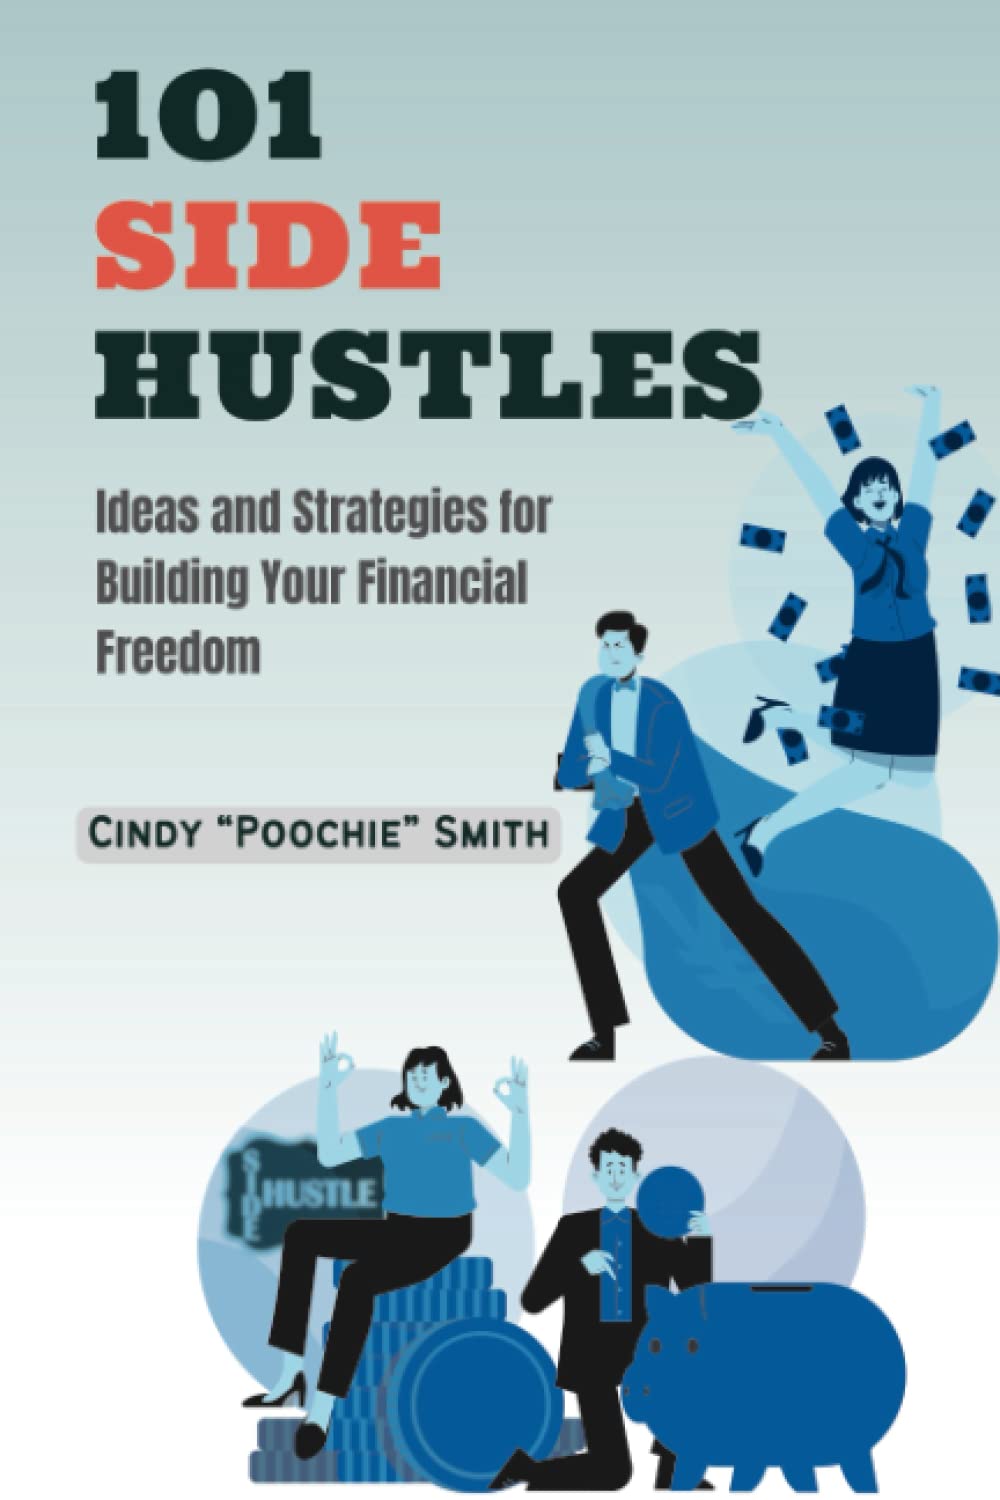 101 Side Hustles: Ideas and Strategies for Building Your Financial Freedom (Making Money Online)